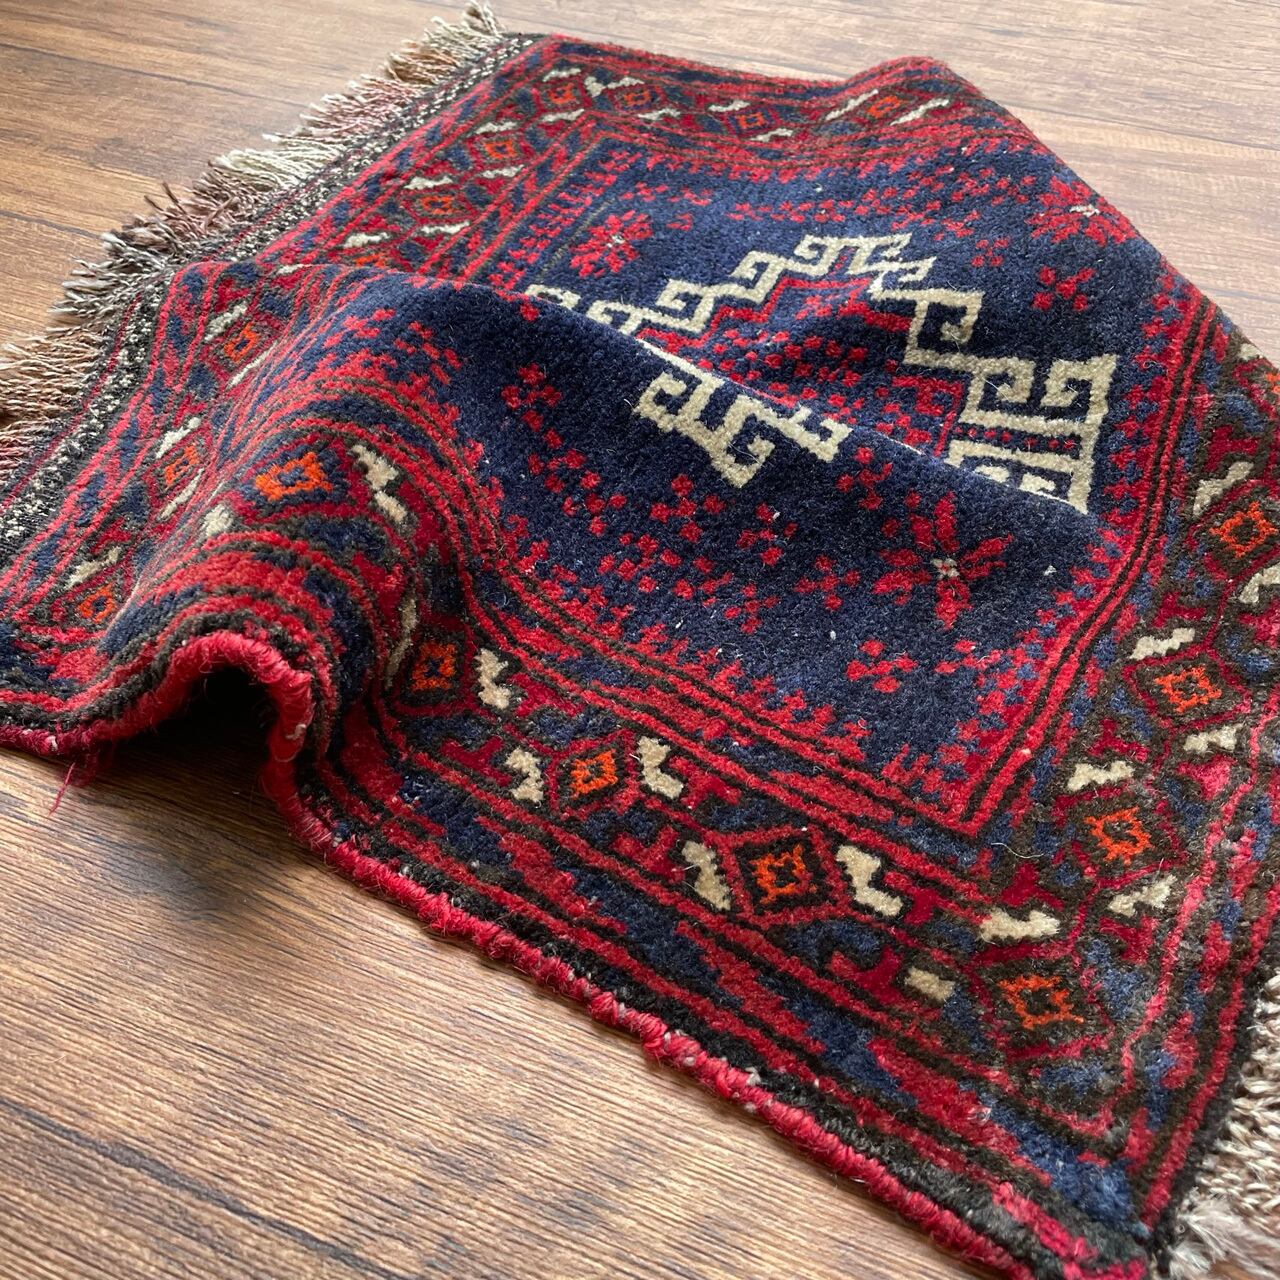 51/120 1950's ViNTAGE SMALL RUG